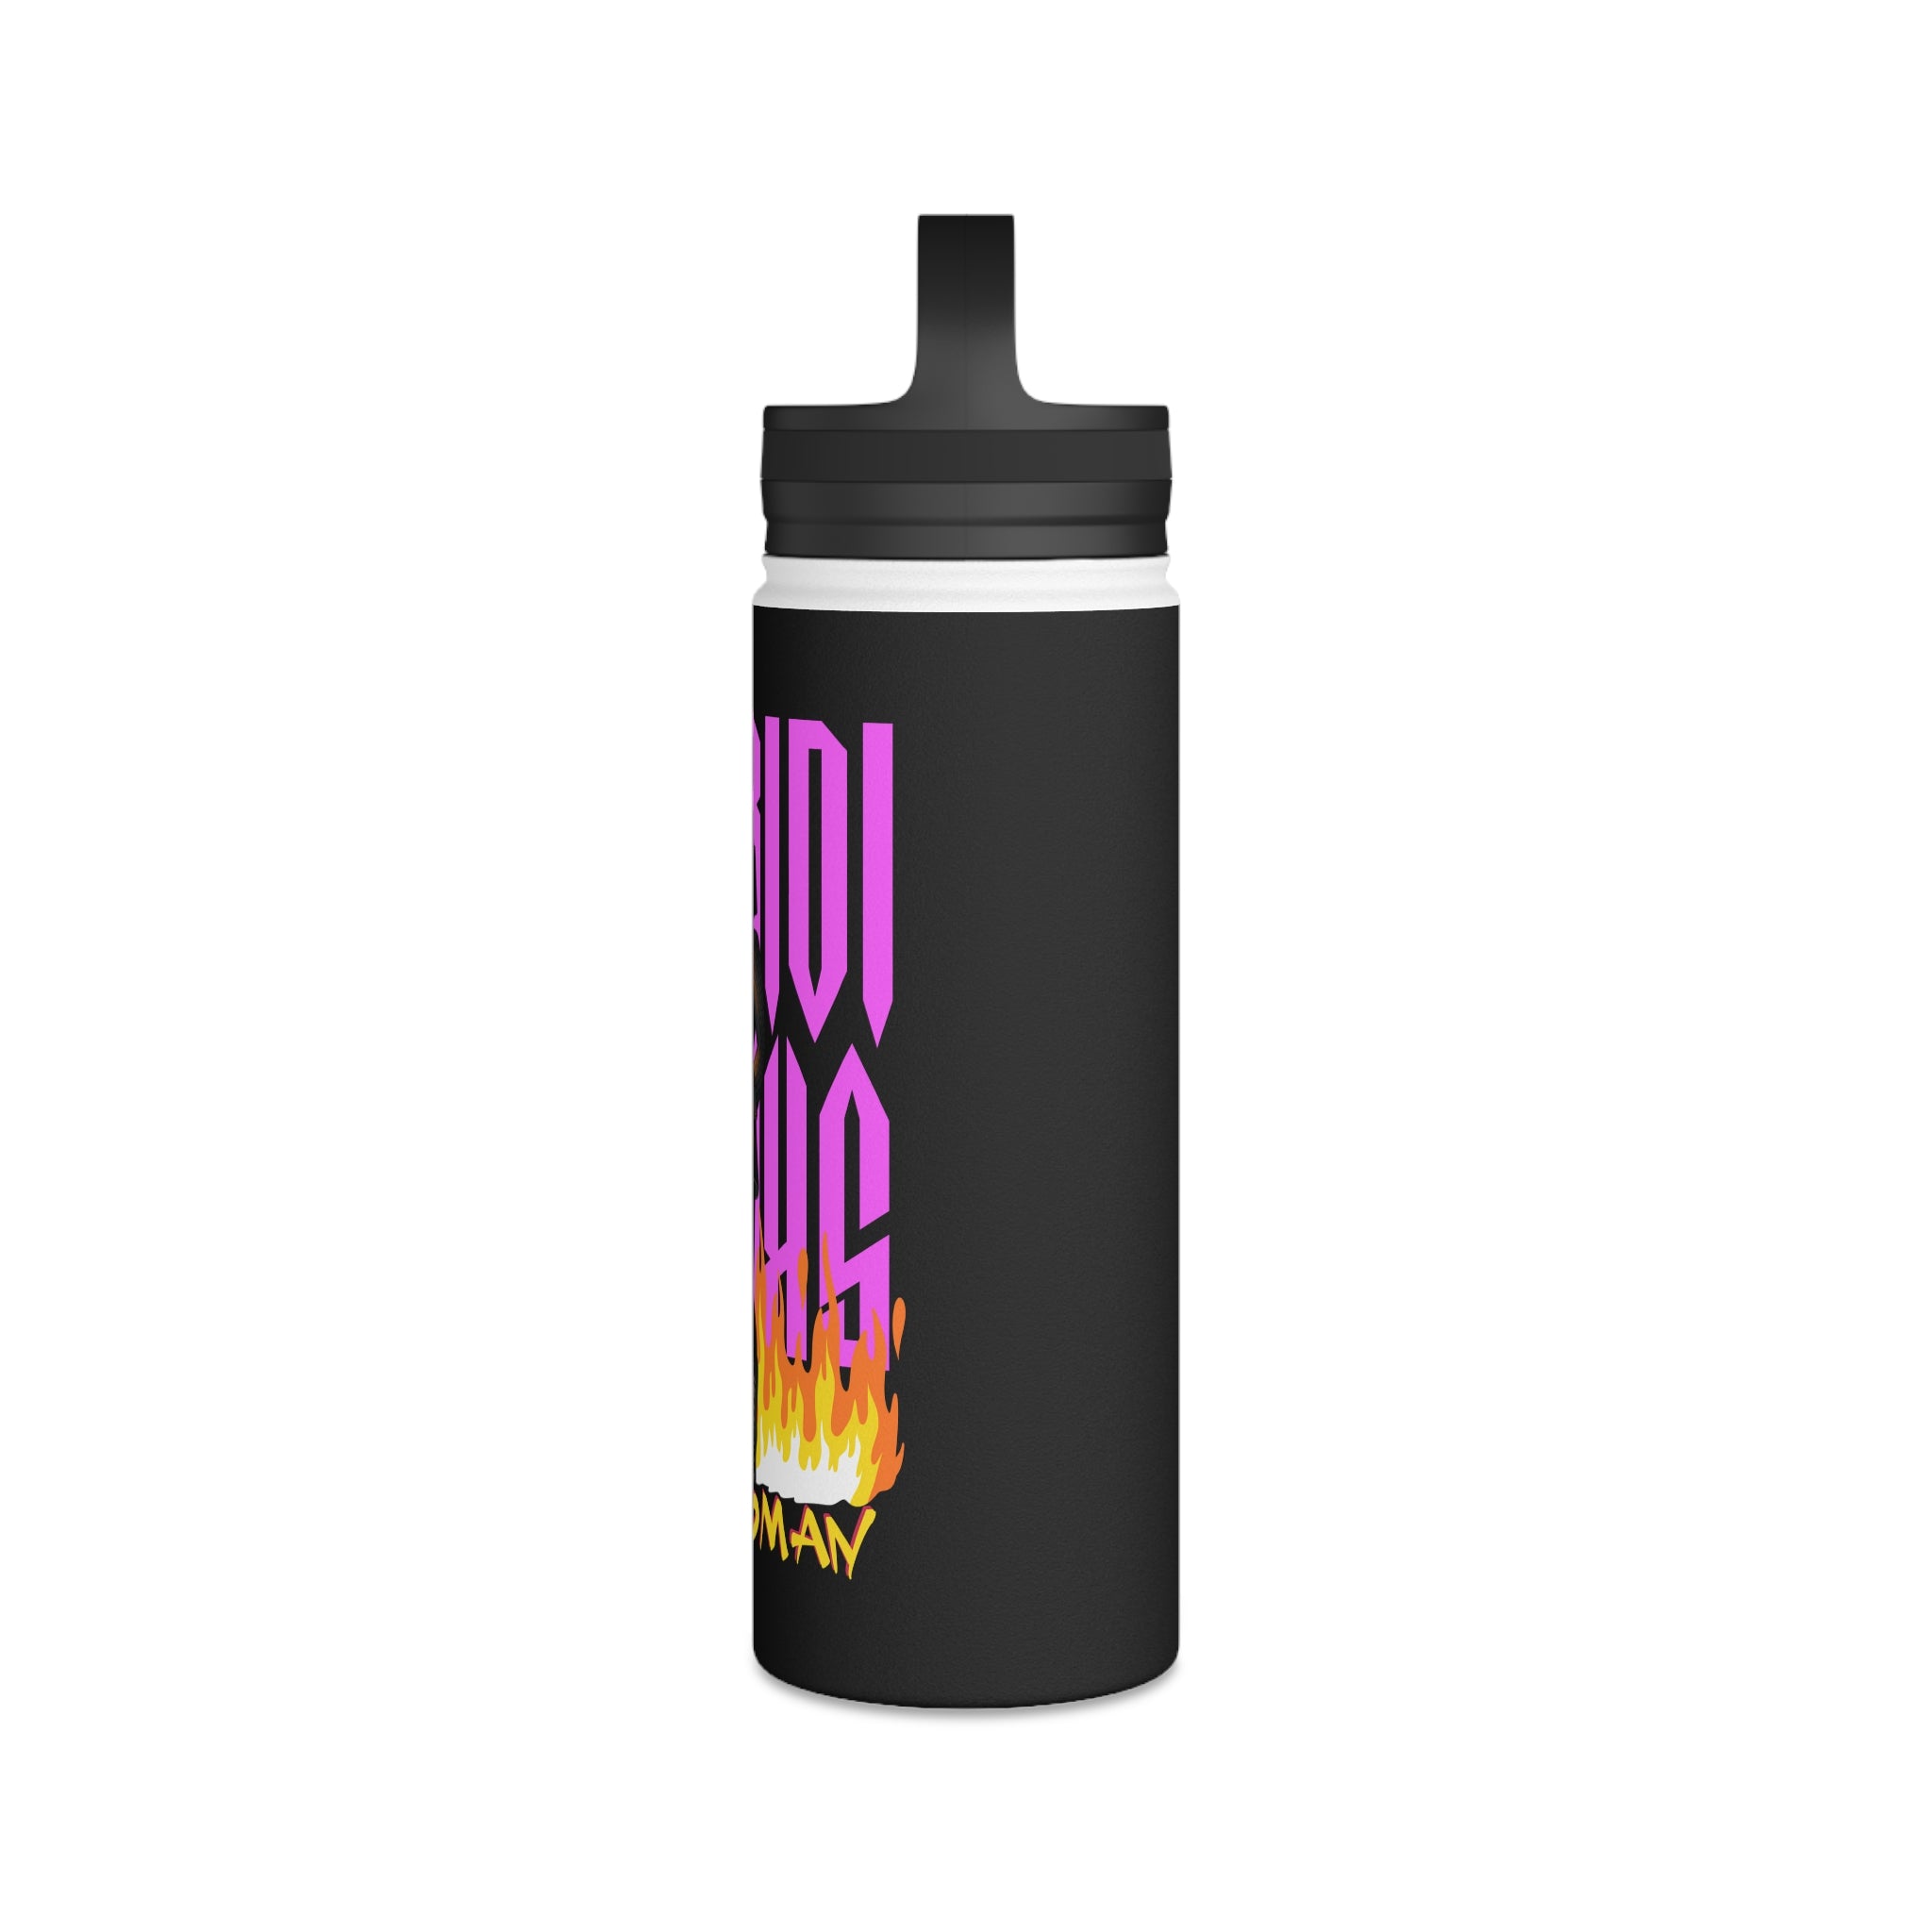 he essence of the brand while ensuring you stay refreshed on the go. Alt Tag: "Black 18oz water bottle with TV Woman artwork from Skibidi